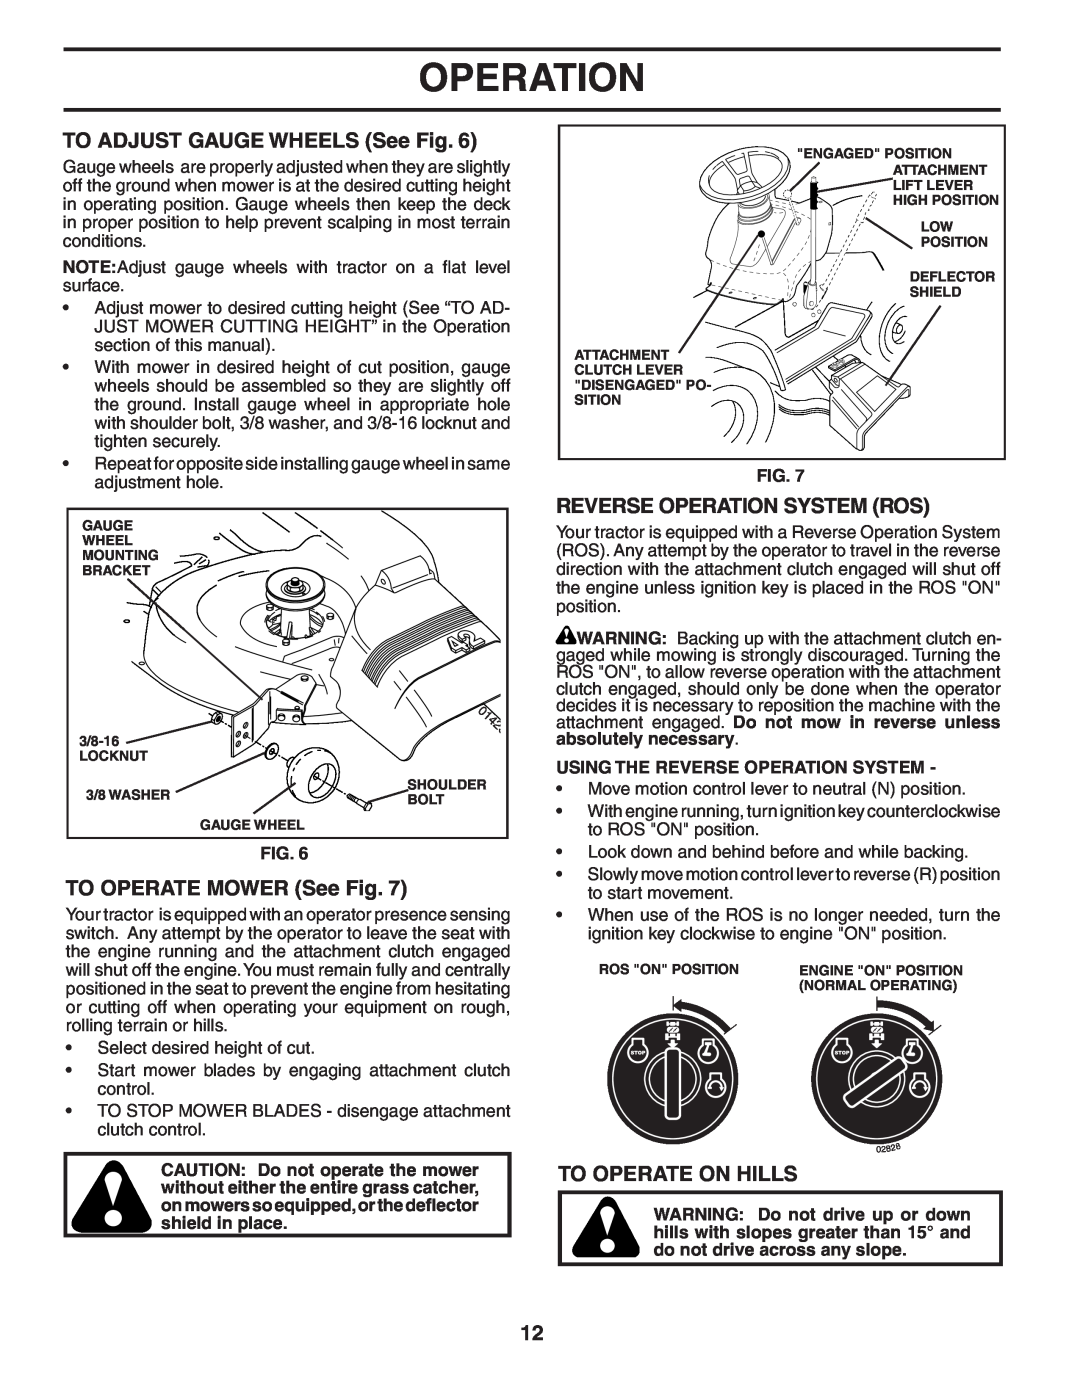 Poulan 96012004701, 402559 manual TO ADJUST GAUGE WHEELS See Fig, TO OPERATE MOWER See Fig, Reverse Operation System Ros 